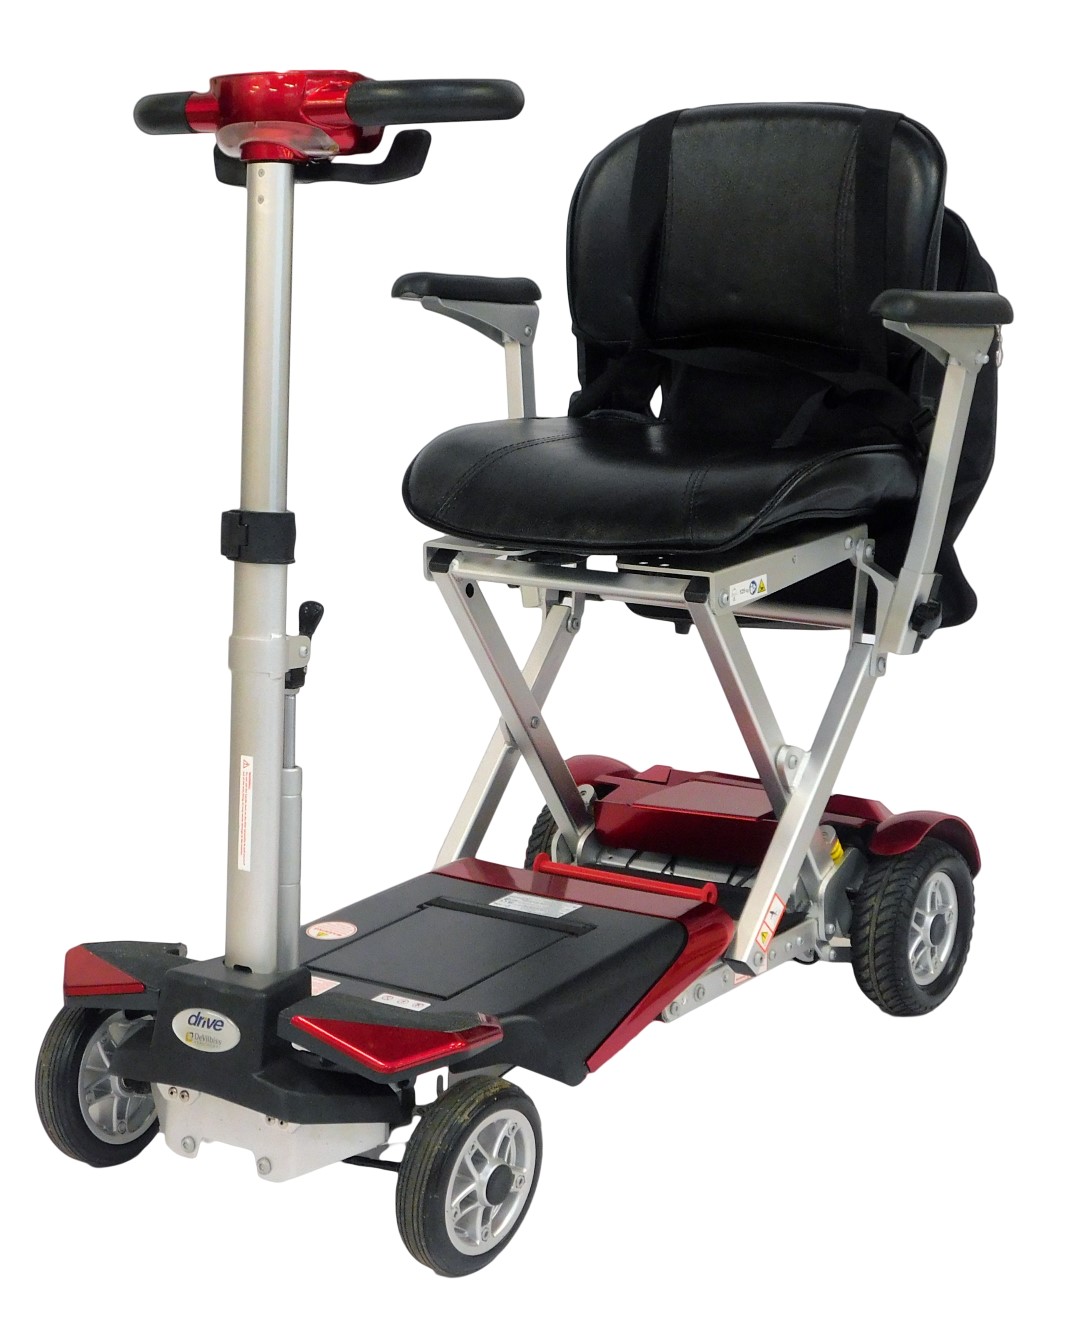 A Drive Auto Fold Elite scooter, in red, S3026-2.